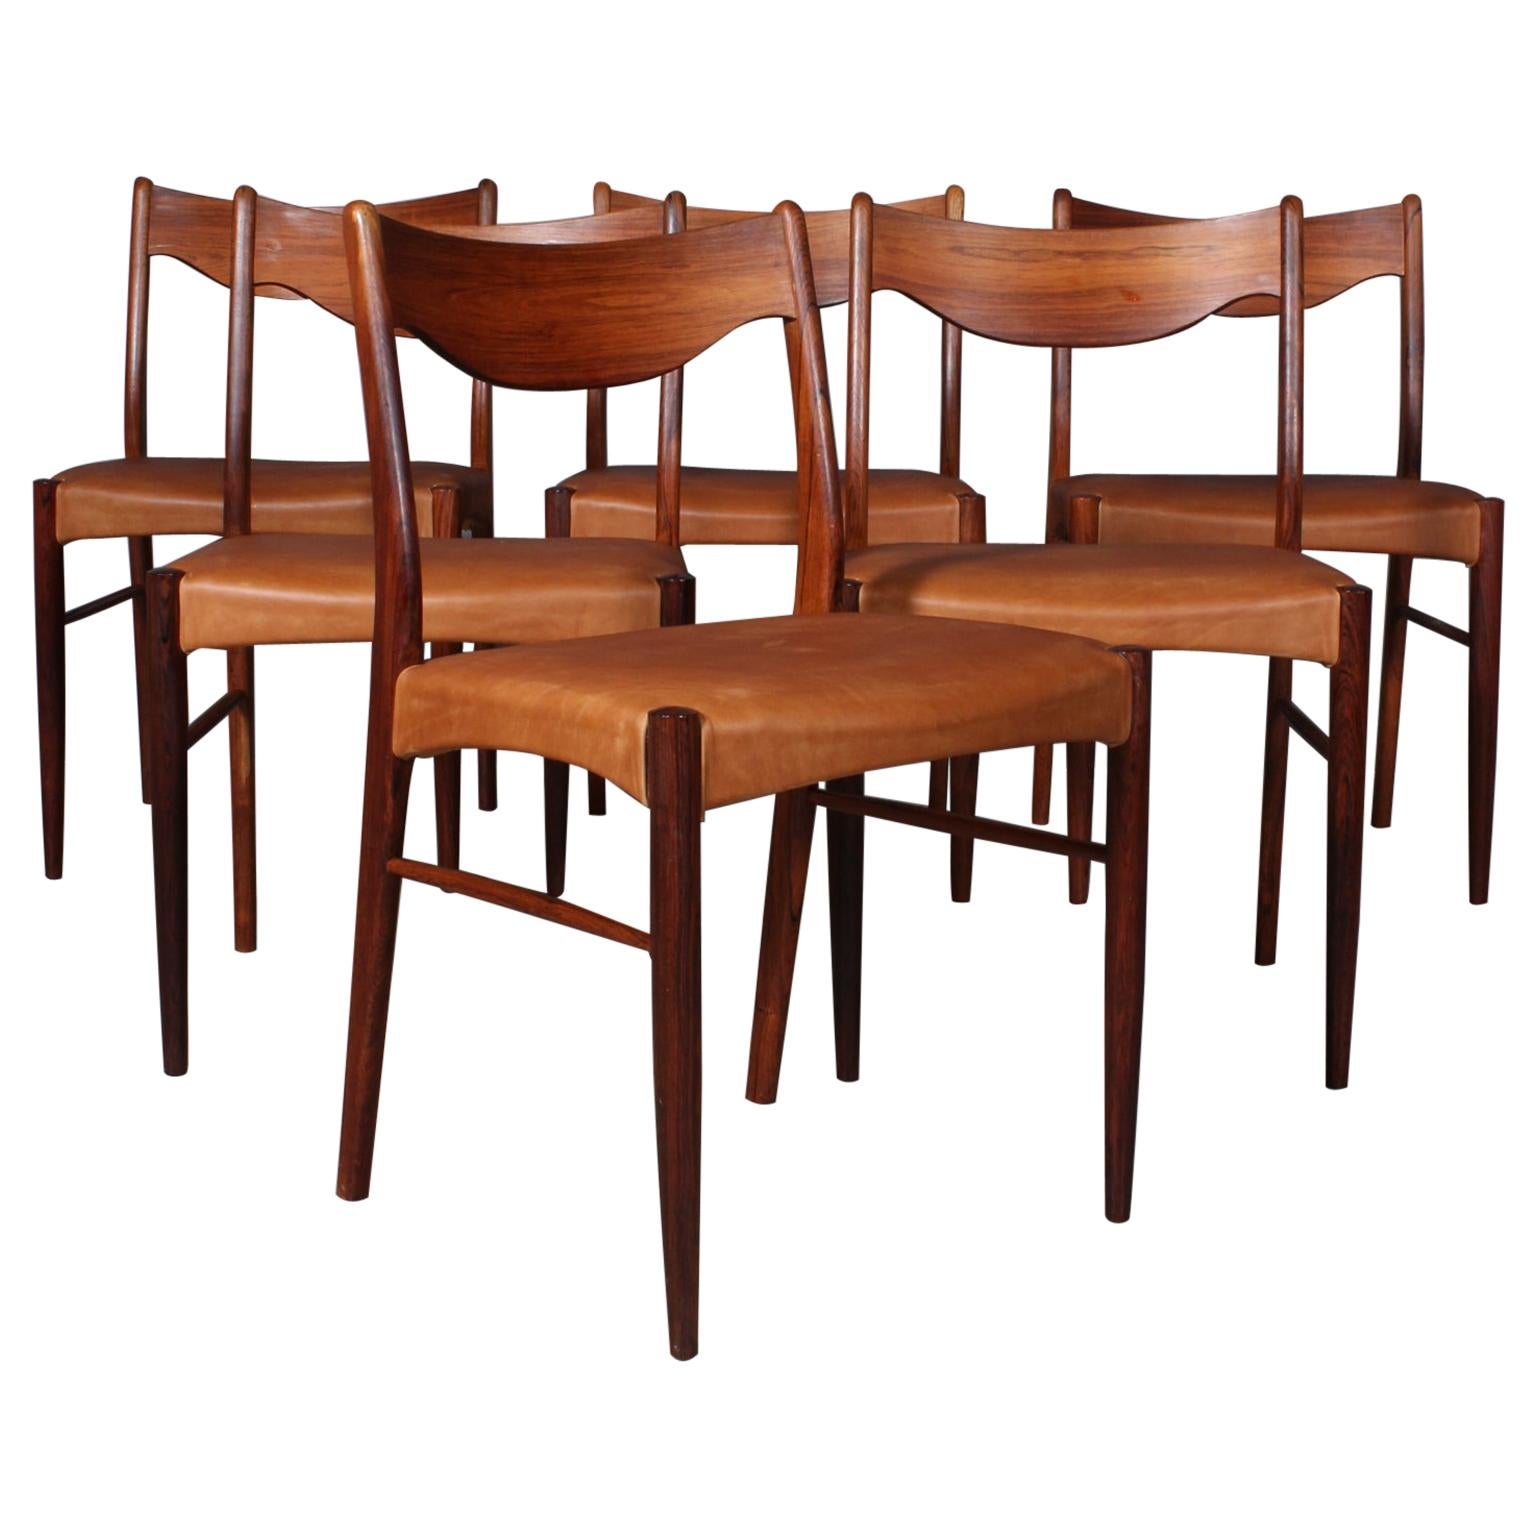 Arne Wahl Dining Chairs, Set of 6